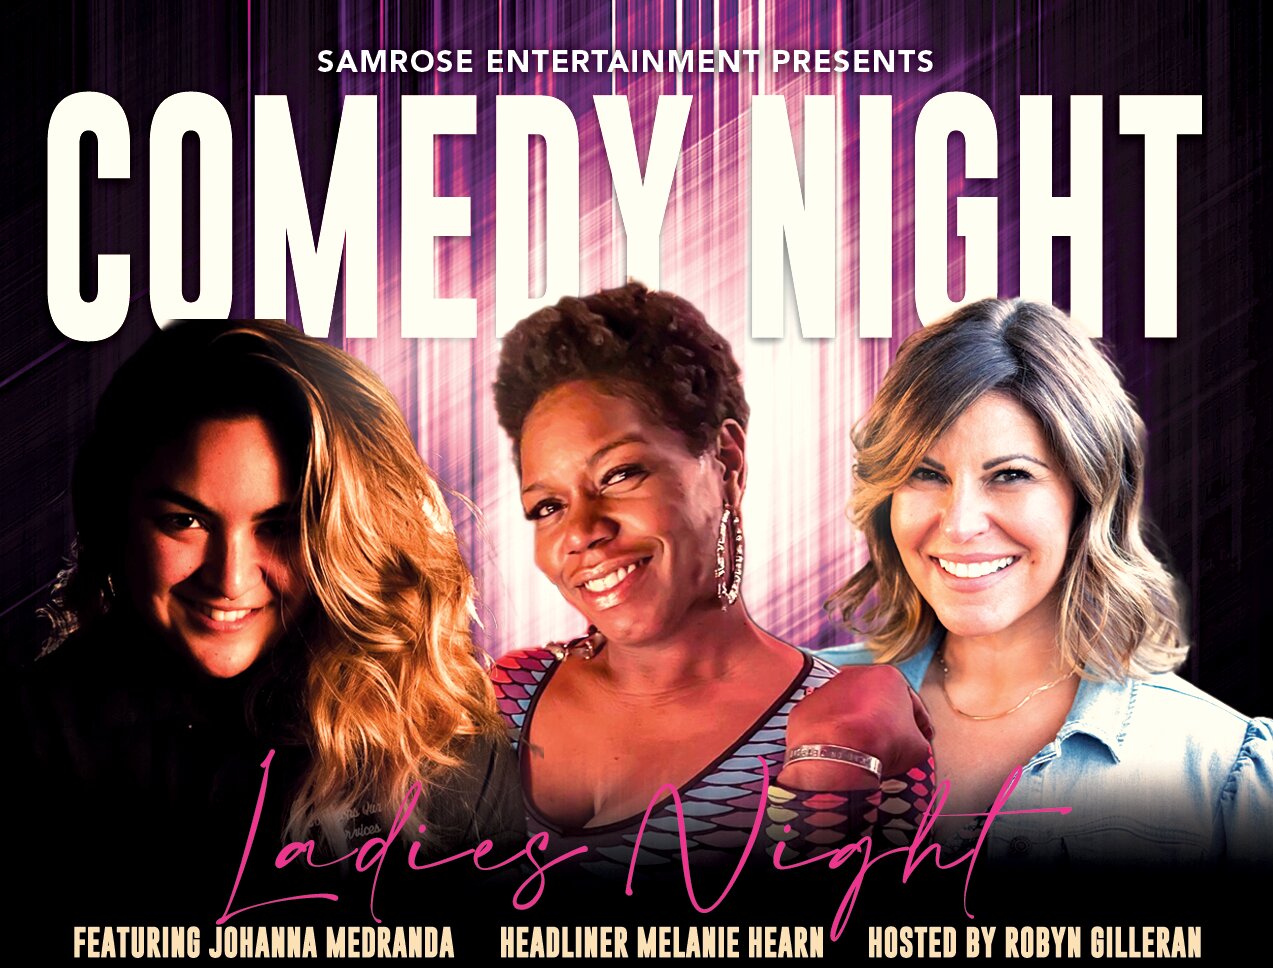 SamRose Entertainment’s first monthly comedy event at UrbanBeat is Ladies’ Night, featuring an all-female lineup of stand-up comedians.